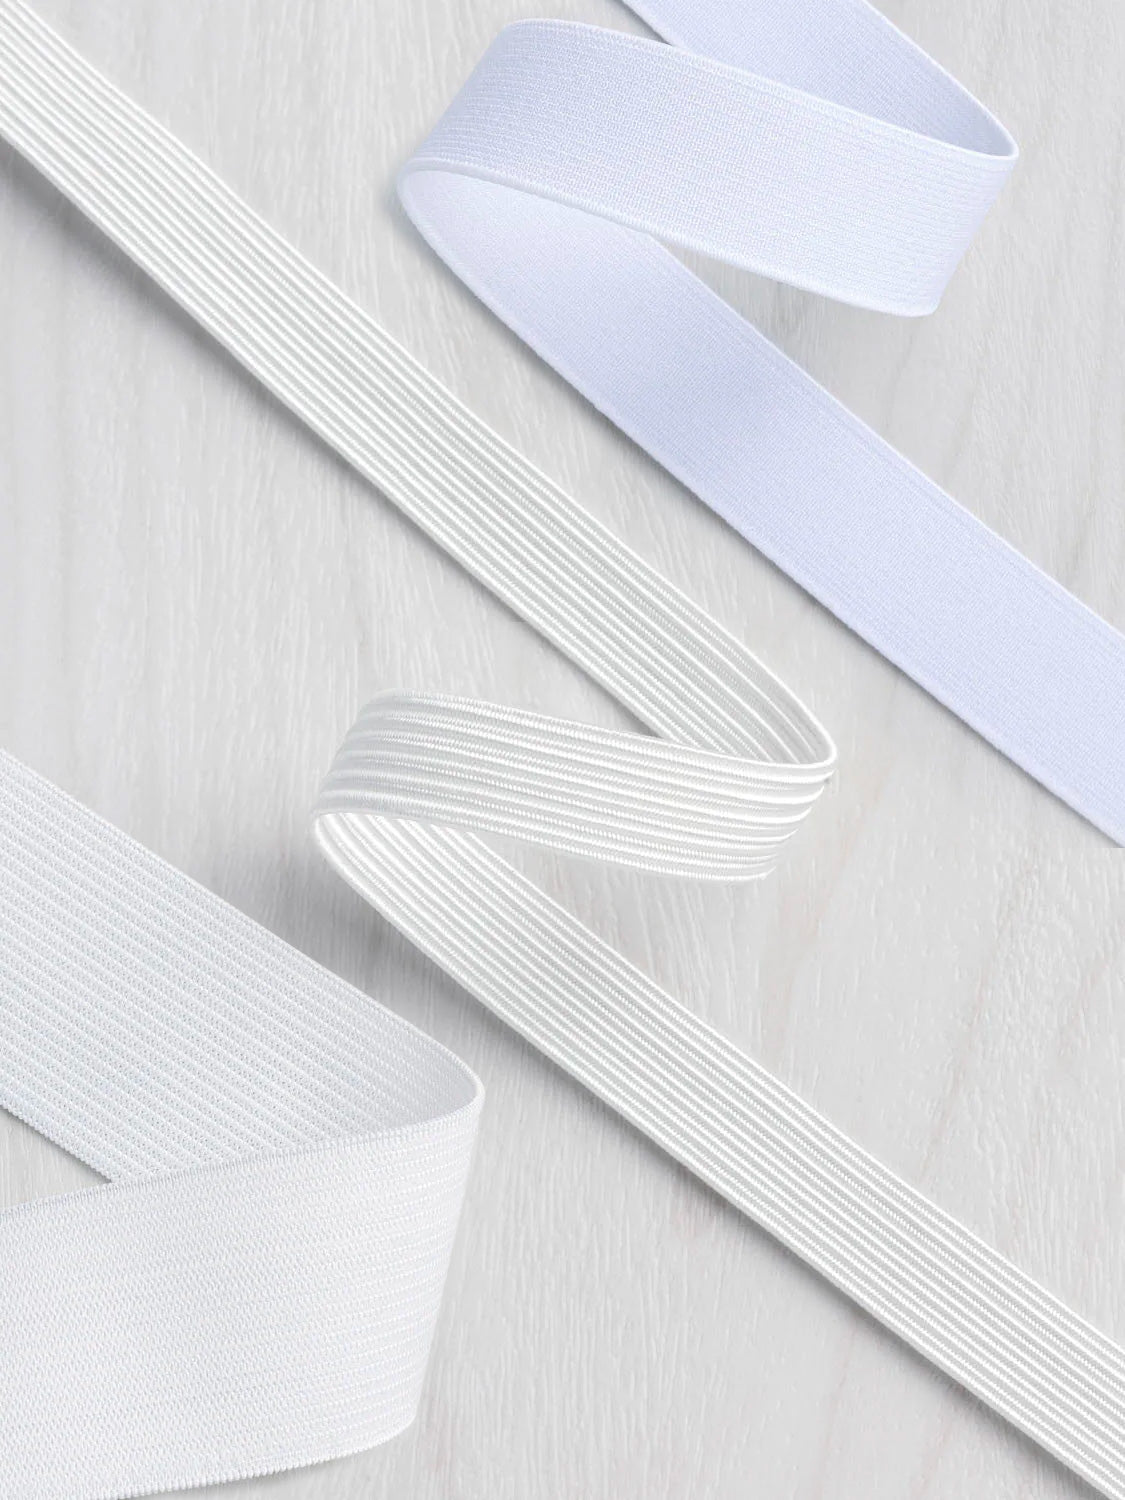 Sewing Elastic Types: Which One to Use in Your Project